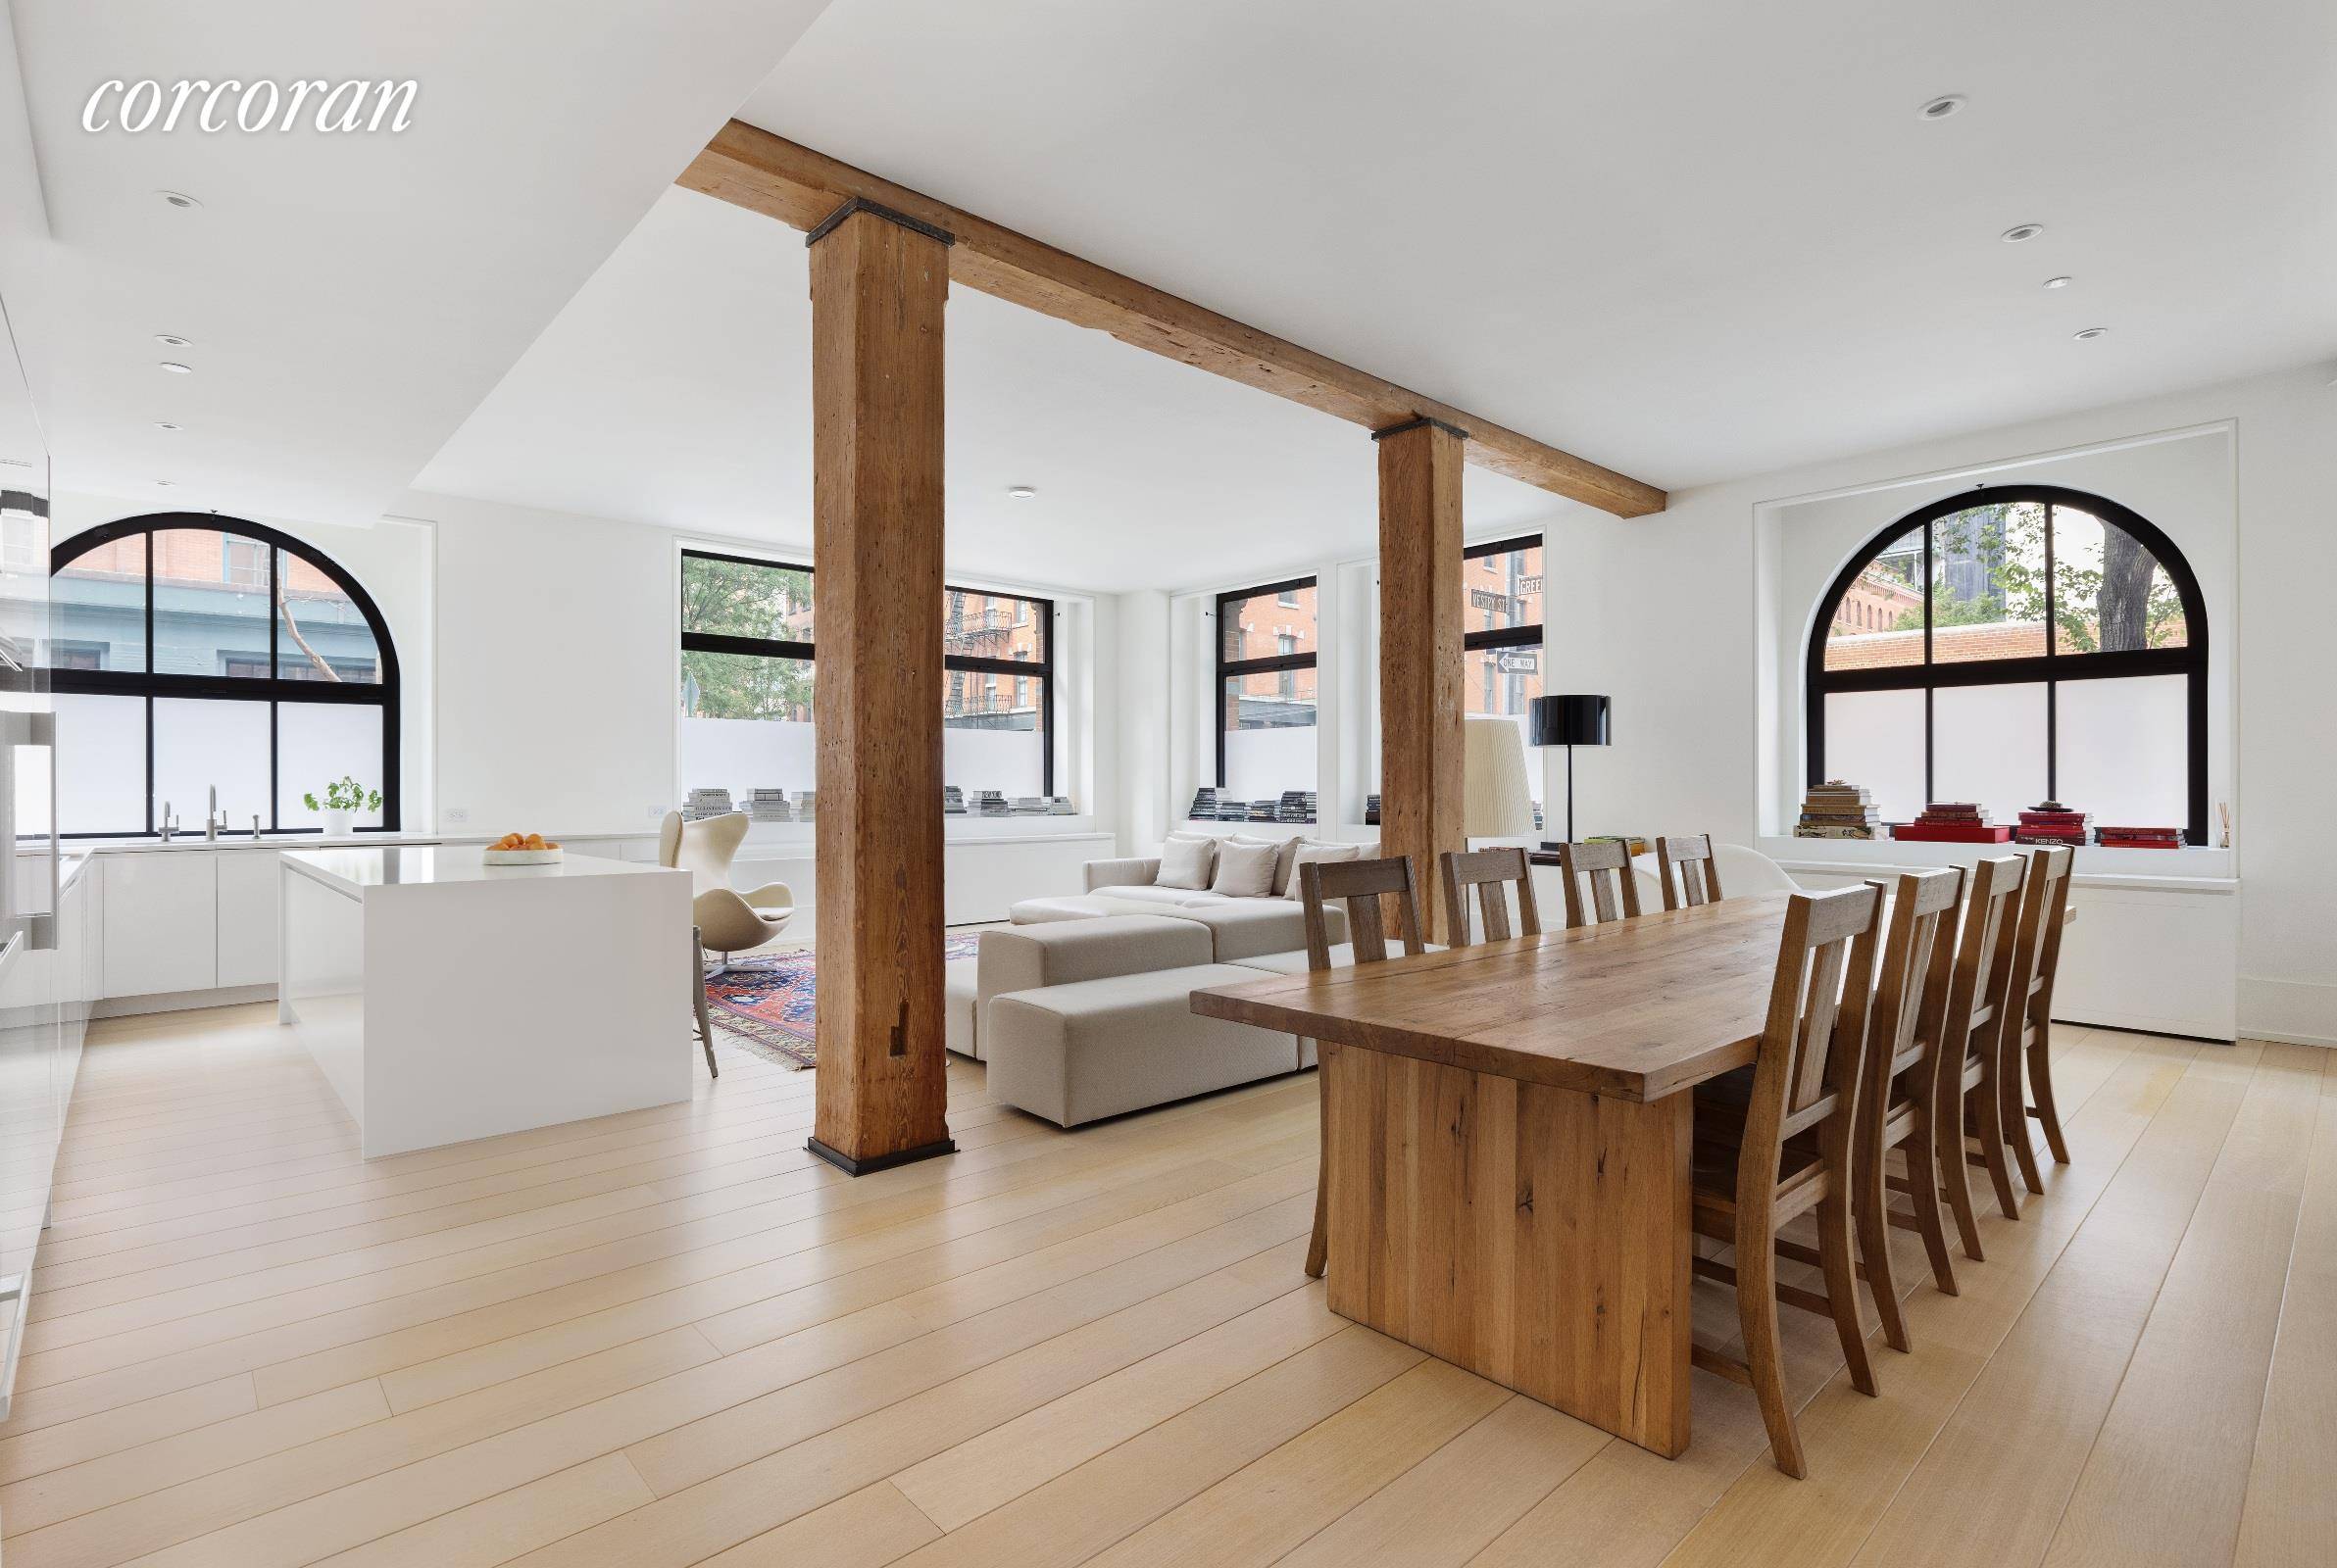 Virtually Staged Photography Kitchen Island Residence 1A at 443 Greenwich Street Prized TriBeCa Corner Residence Four Bedrooms Three Baths 2, 644 sqftPerfectly situated on the corner of Greenwich Street and ...